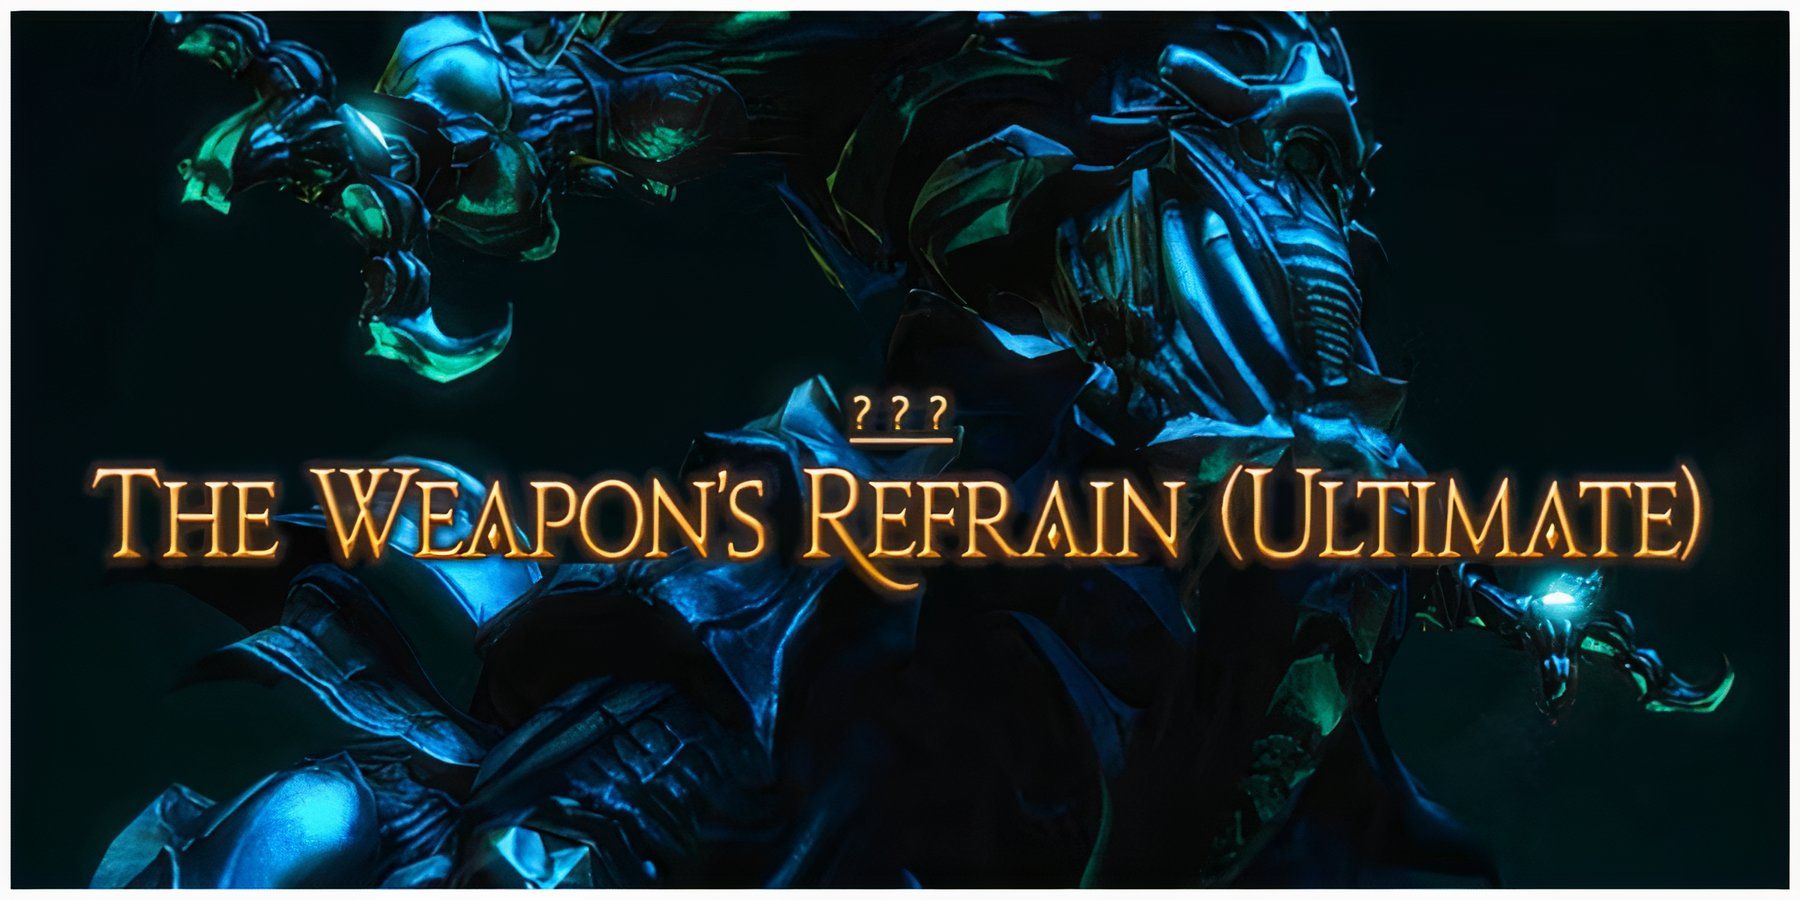 the weapon's refrain (ultimate) screen from Final Fantasy 14